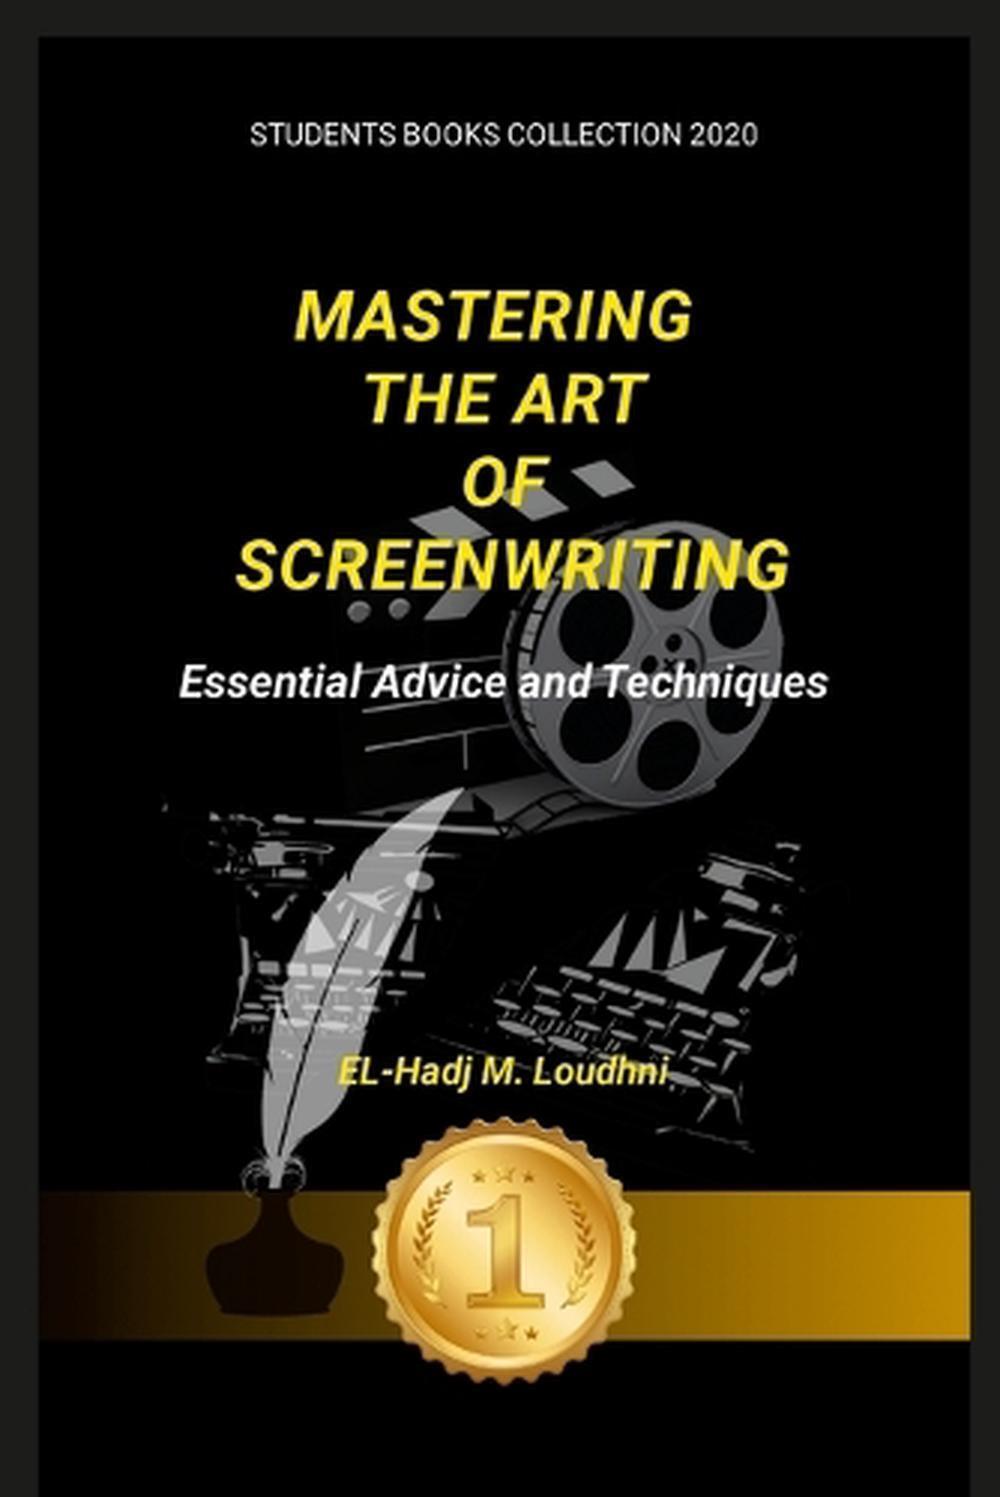 Mastering the Art of Screenwriting: Essential Advice and Techniques by El-Hadj M